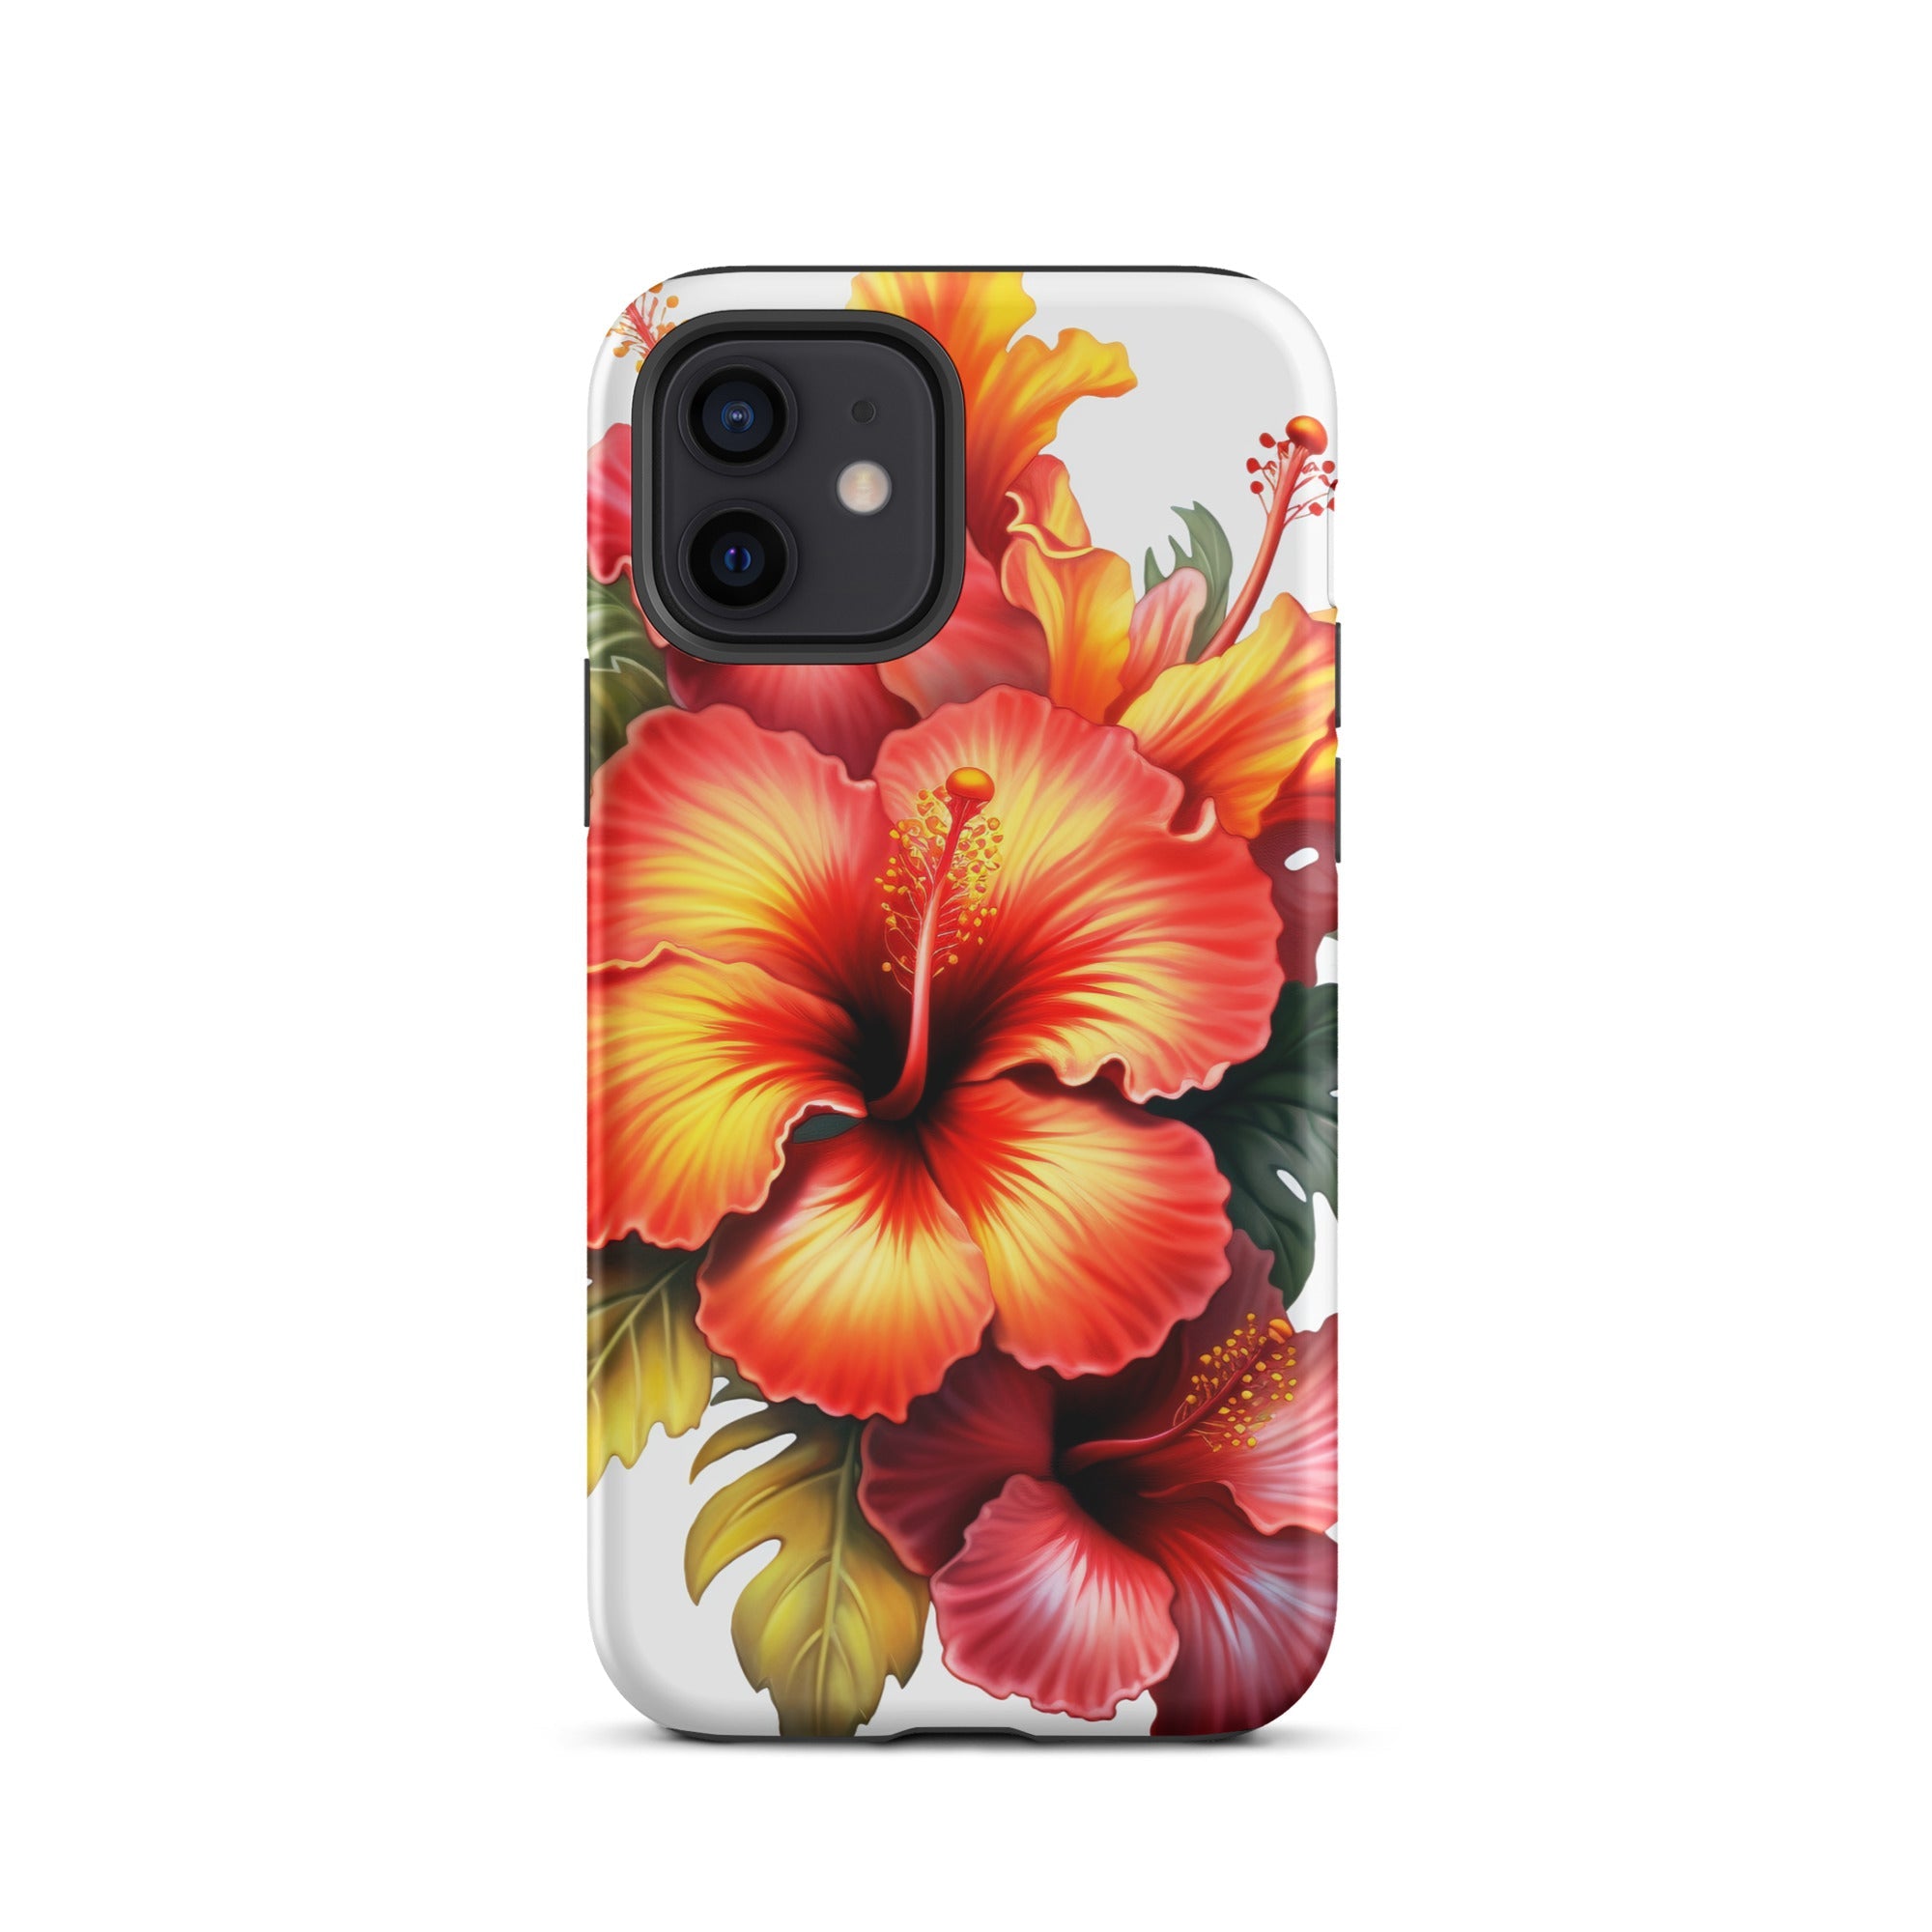 Hibiscus Flower iPhone Case by Visual Verse - Image 10